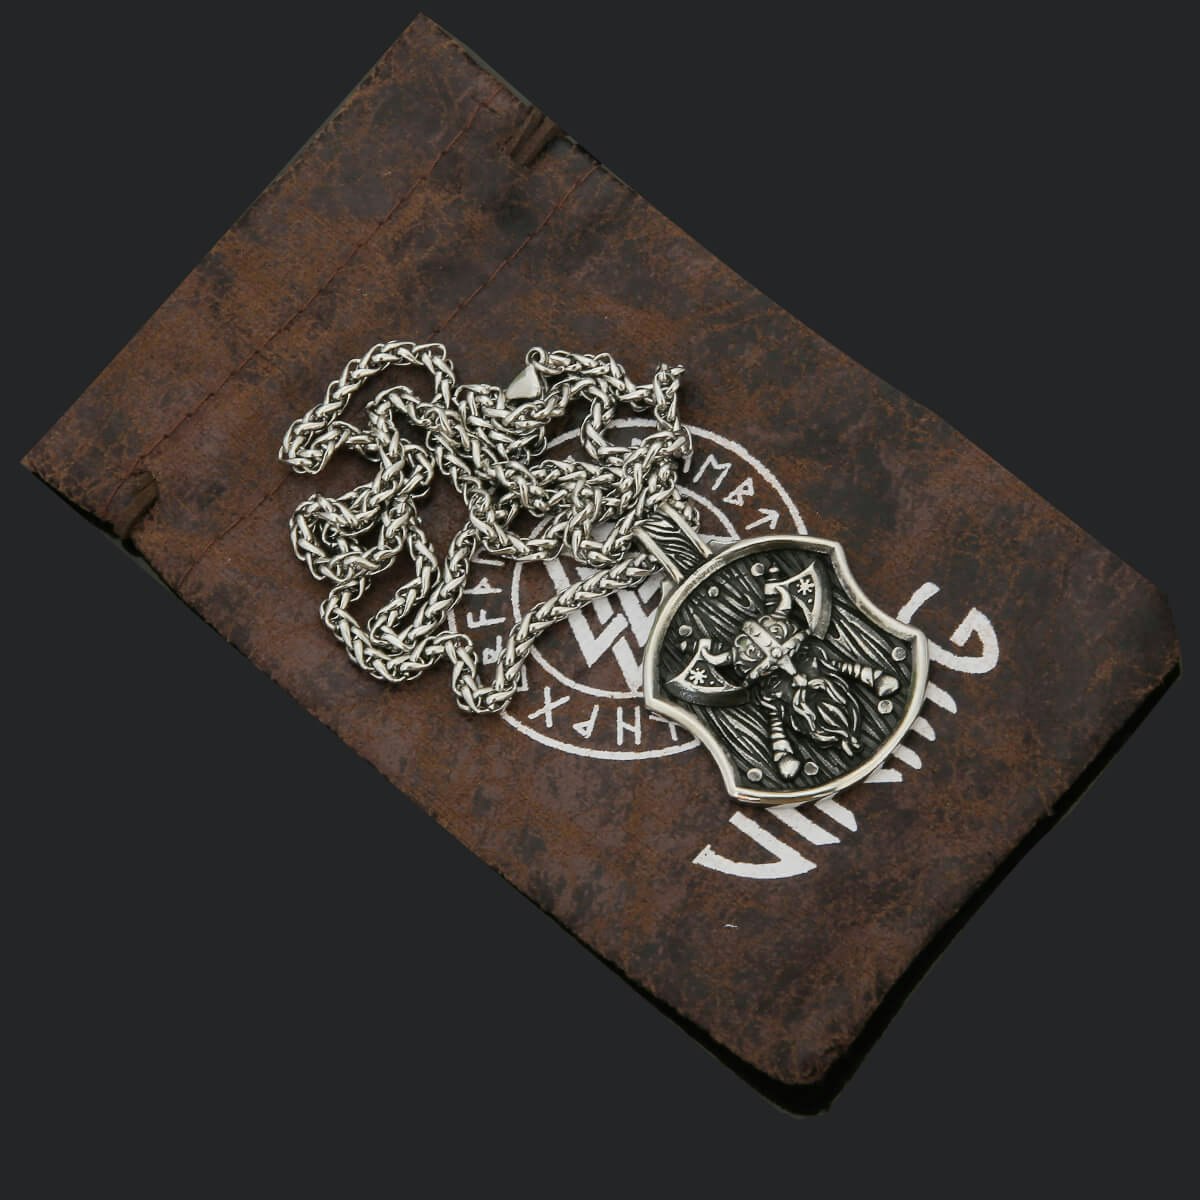 Necklace Shield of Viking